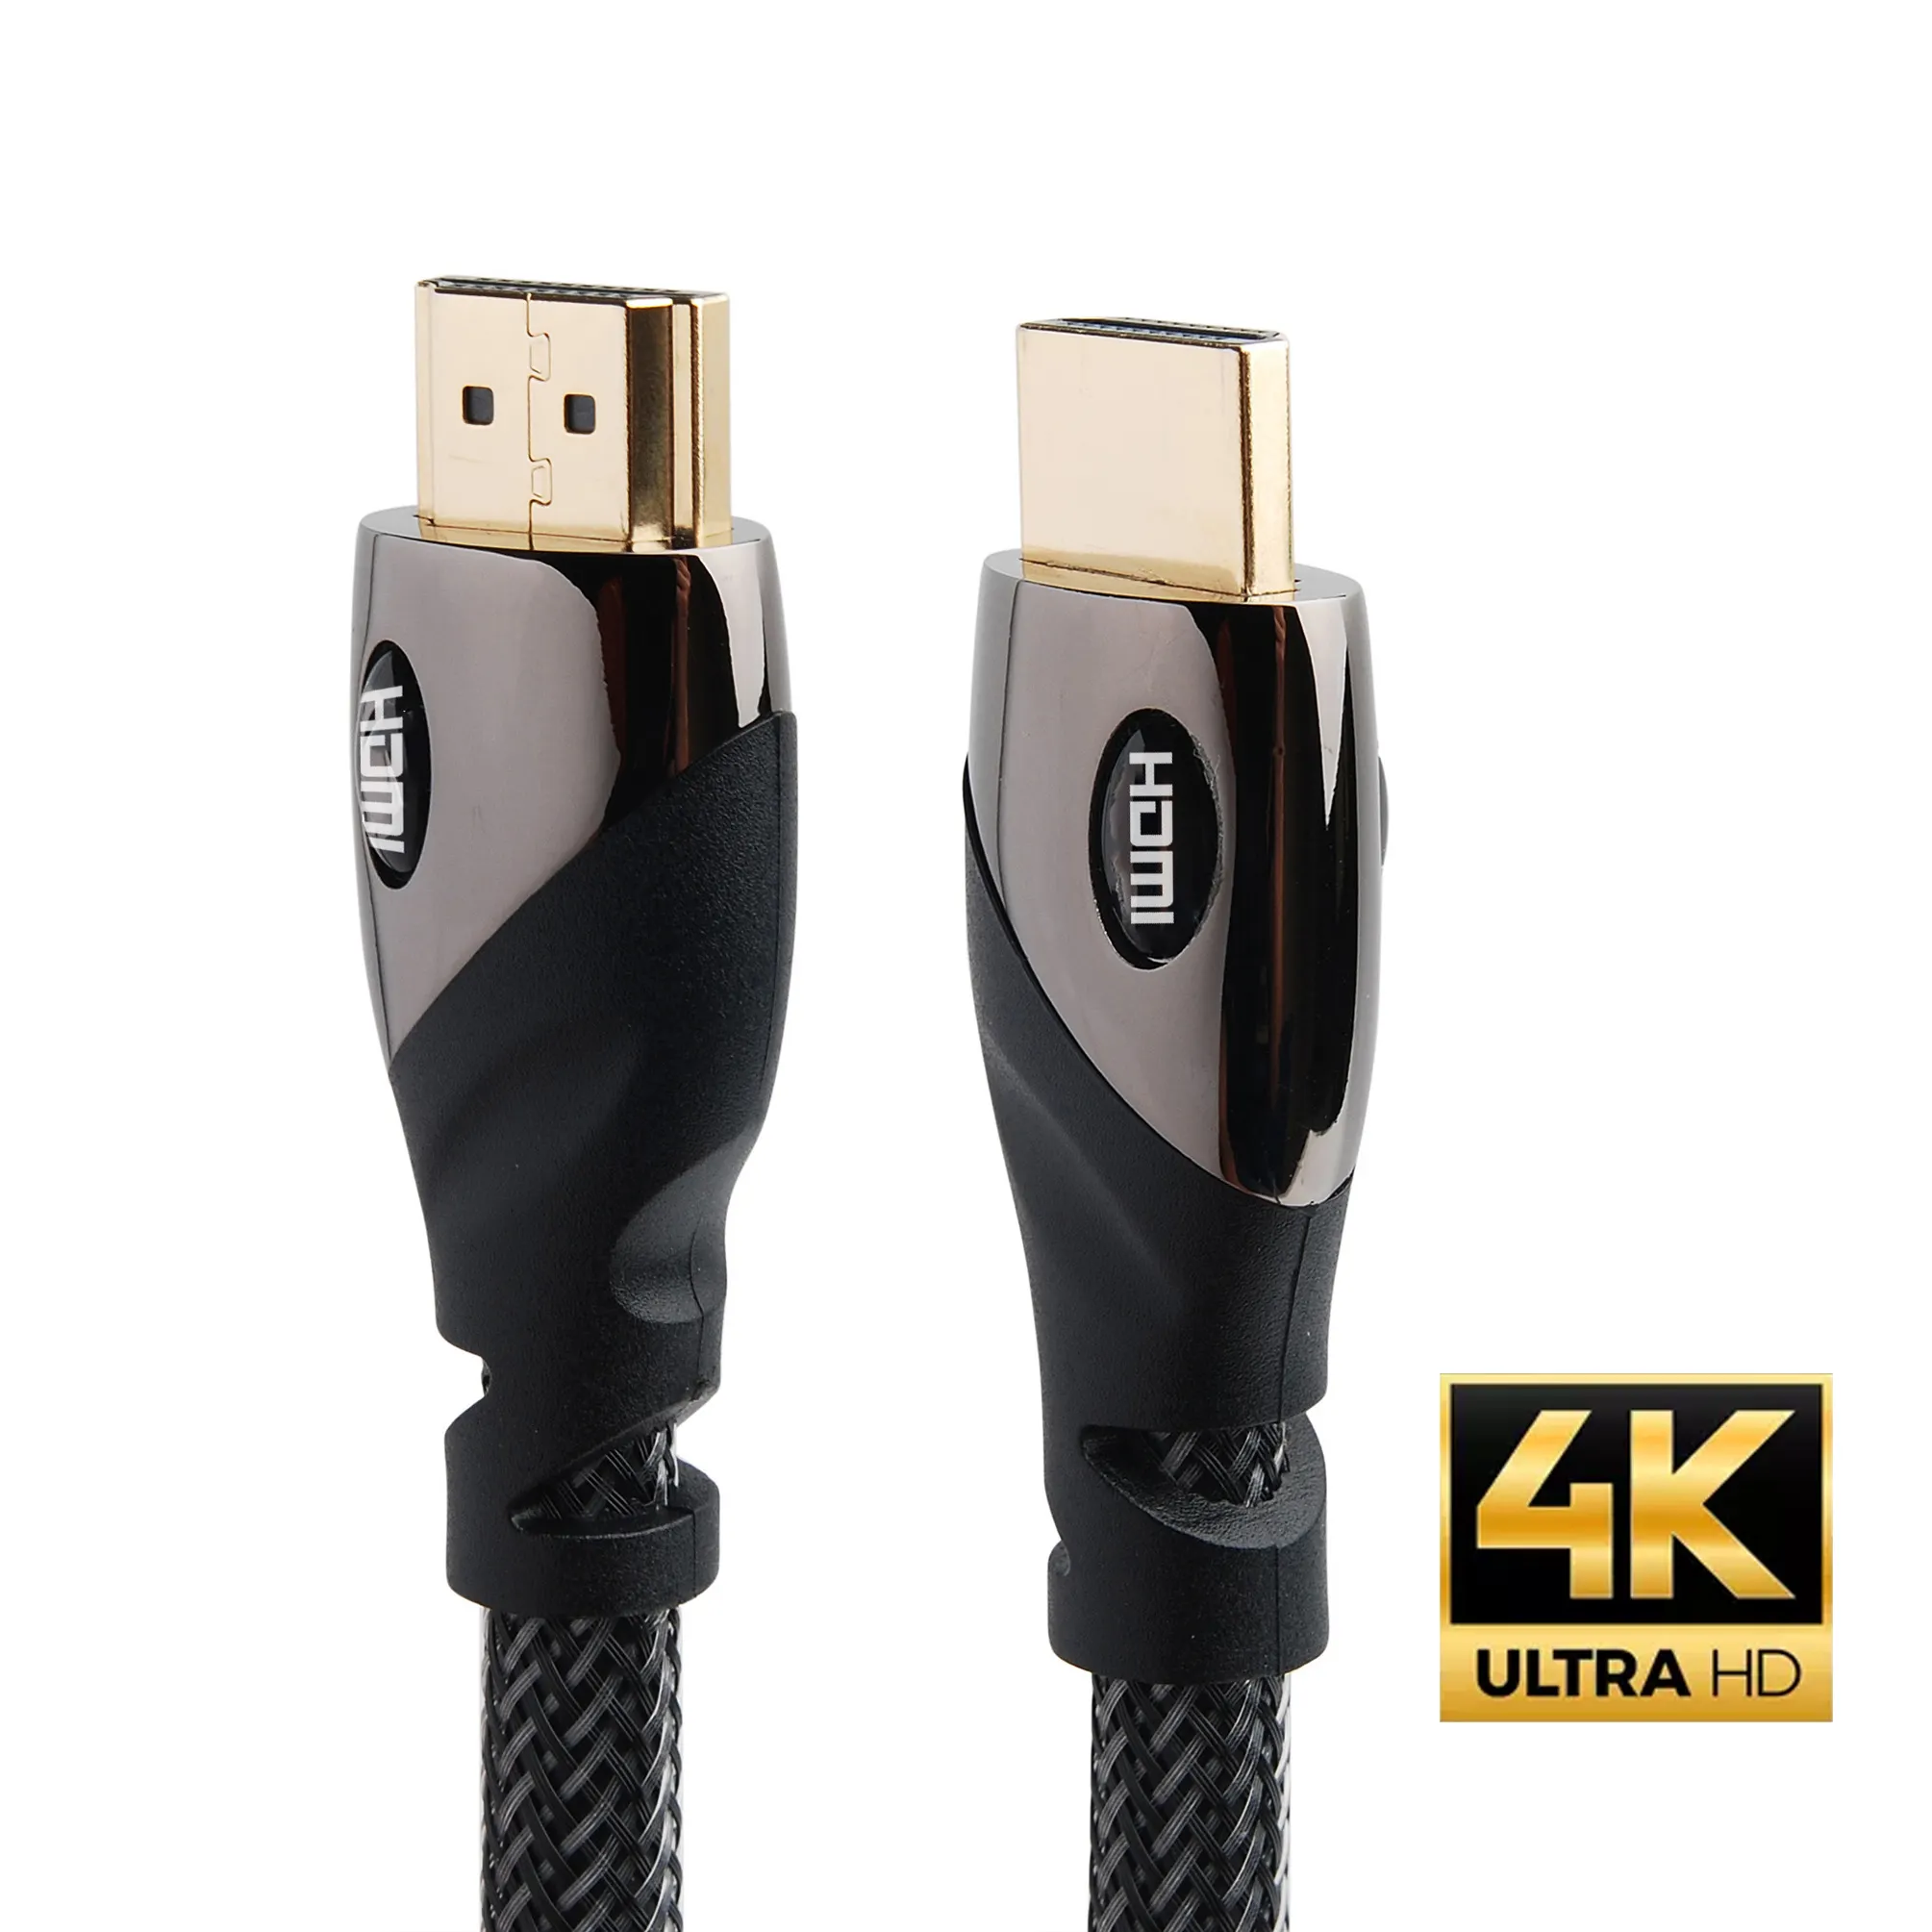 4K 60HZ Cabo Zinc Alloy Nylon Braid Copper 2.0 UHD Video Cabel HD TV Cable Hdmi TO HDMI OEM 4 k 1080p 3D kable HDMI 5 10 Meter